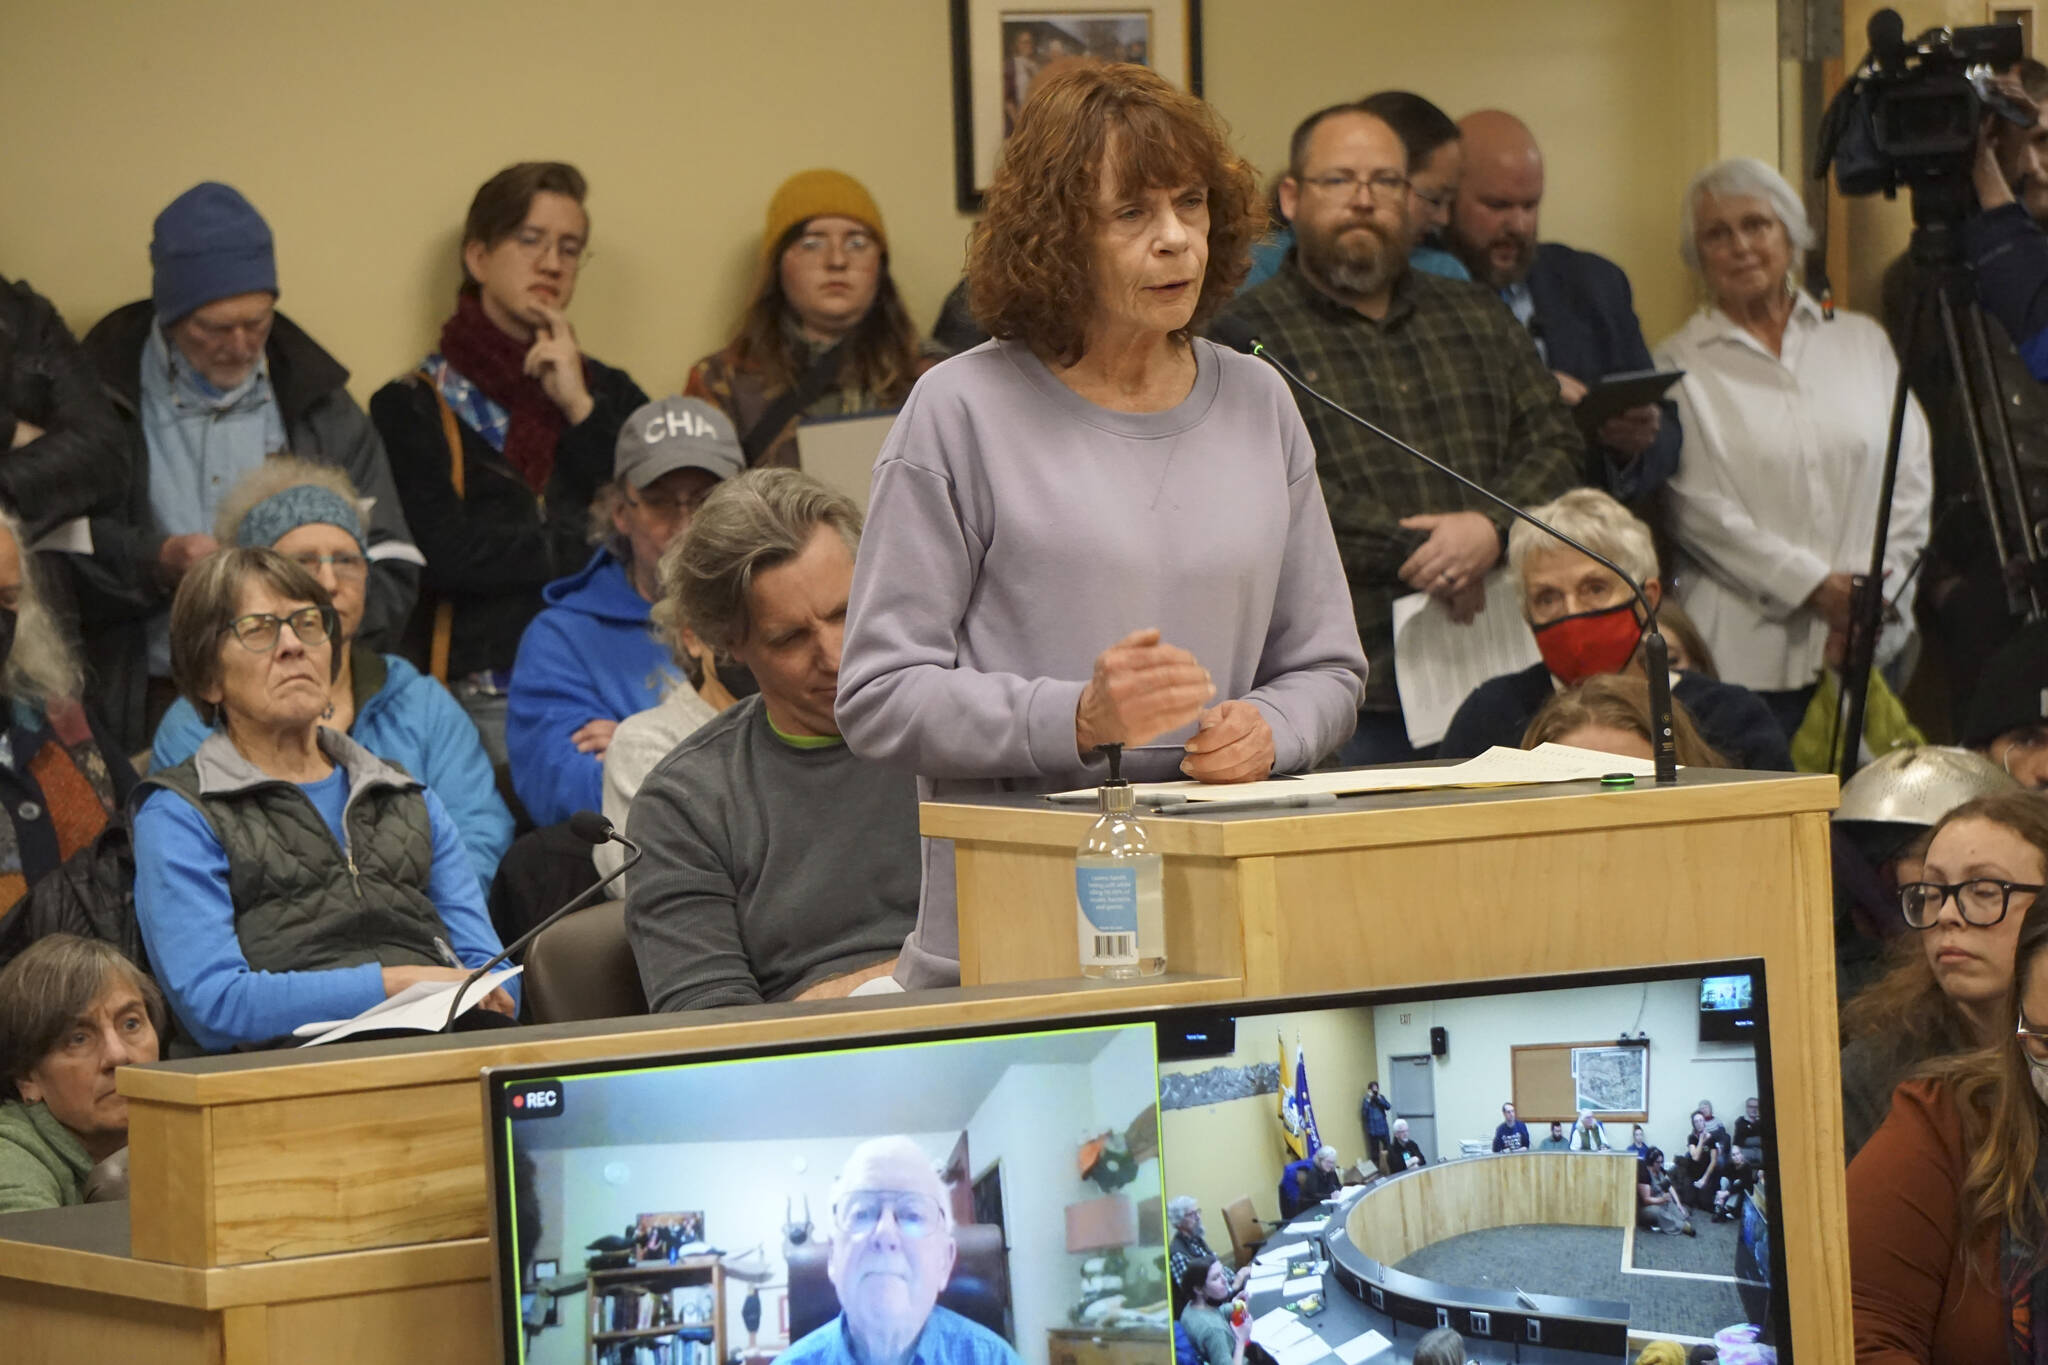 Kelly Cooper speaks at the meeting of the Library Advisory Board on Nov. 15, 2022, in the Cowles Council Chambers at Homer City Hall in Homer, Alaska. (Photo by Michael Armstrong/Homer News)